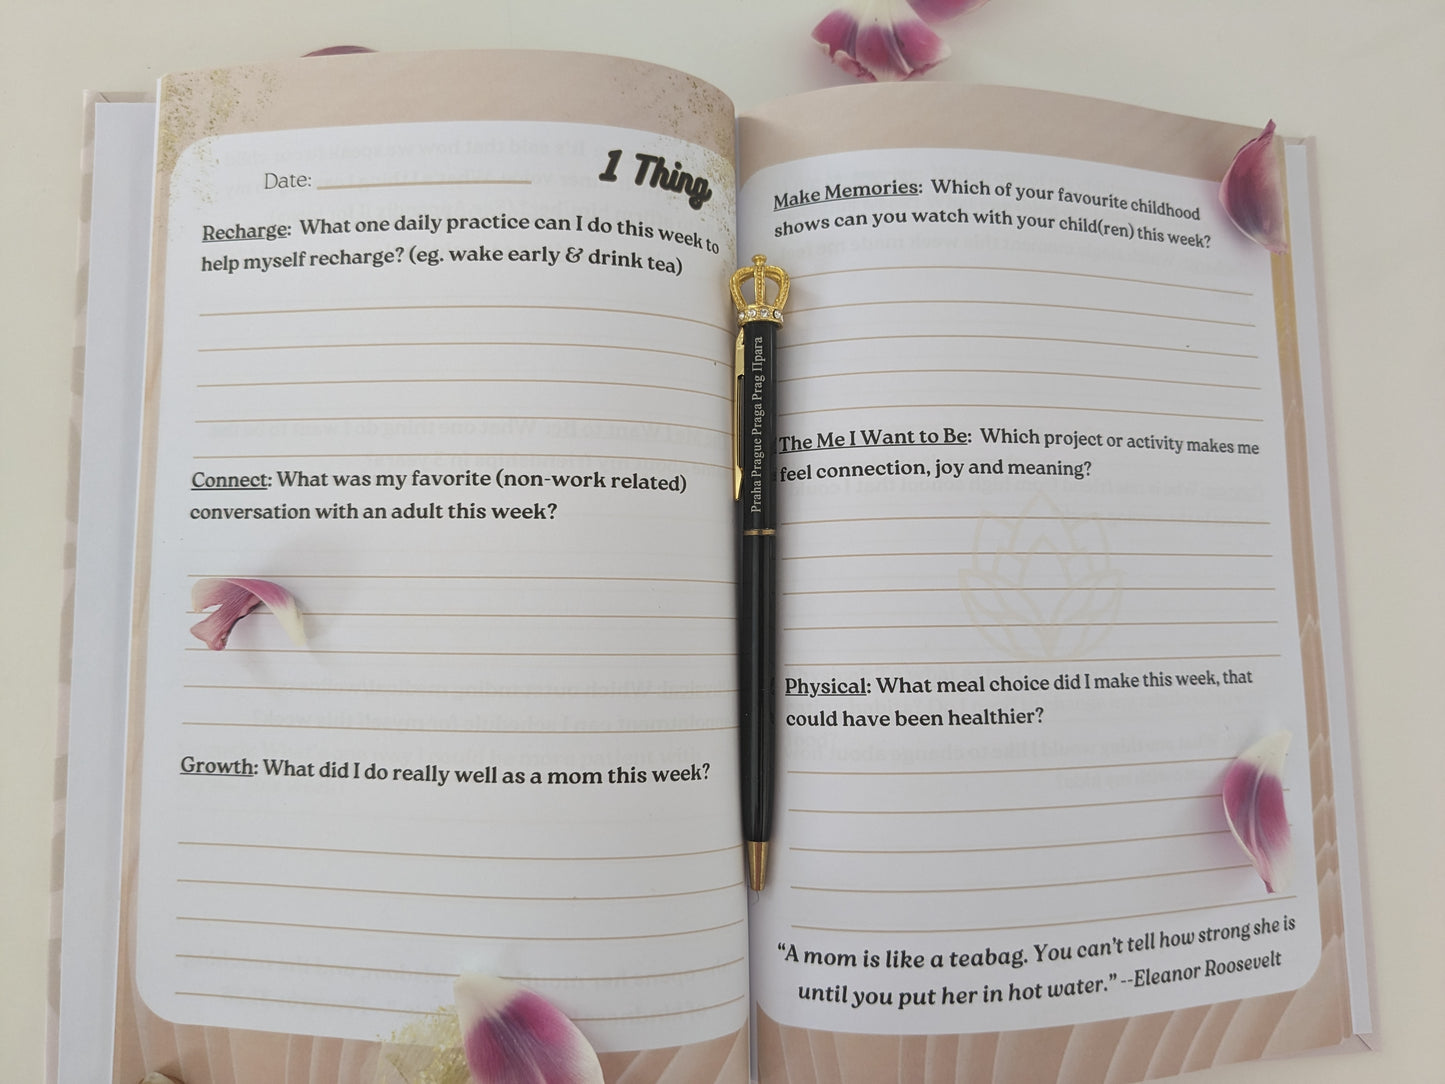 One Thing Weekly Journal for Moms